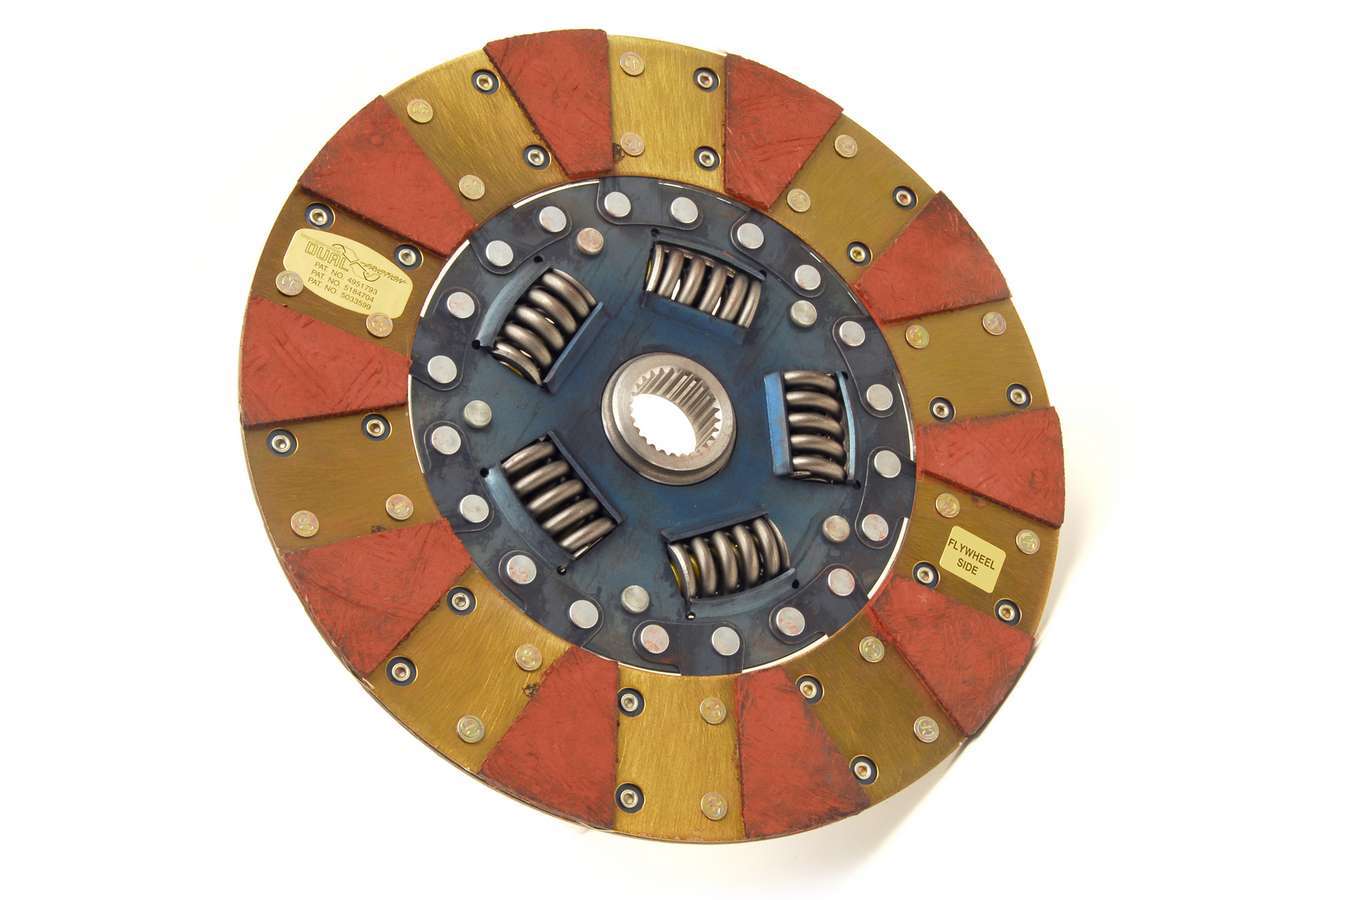 Centerforce DF384161 Clutch Disc, Dual Friction, 10-13/32 in Diameter, 1-1/8 in x 26 Spline, Sprung Hub, Organic / Carbon Composite, Various Applications, Each